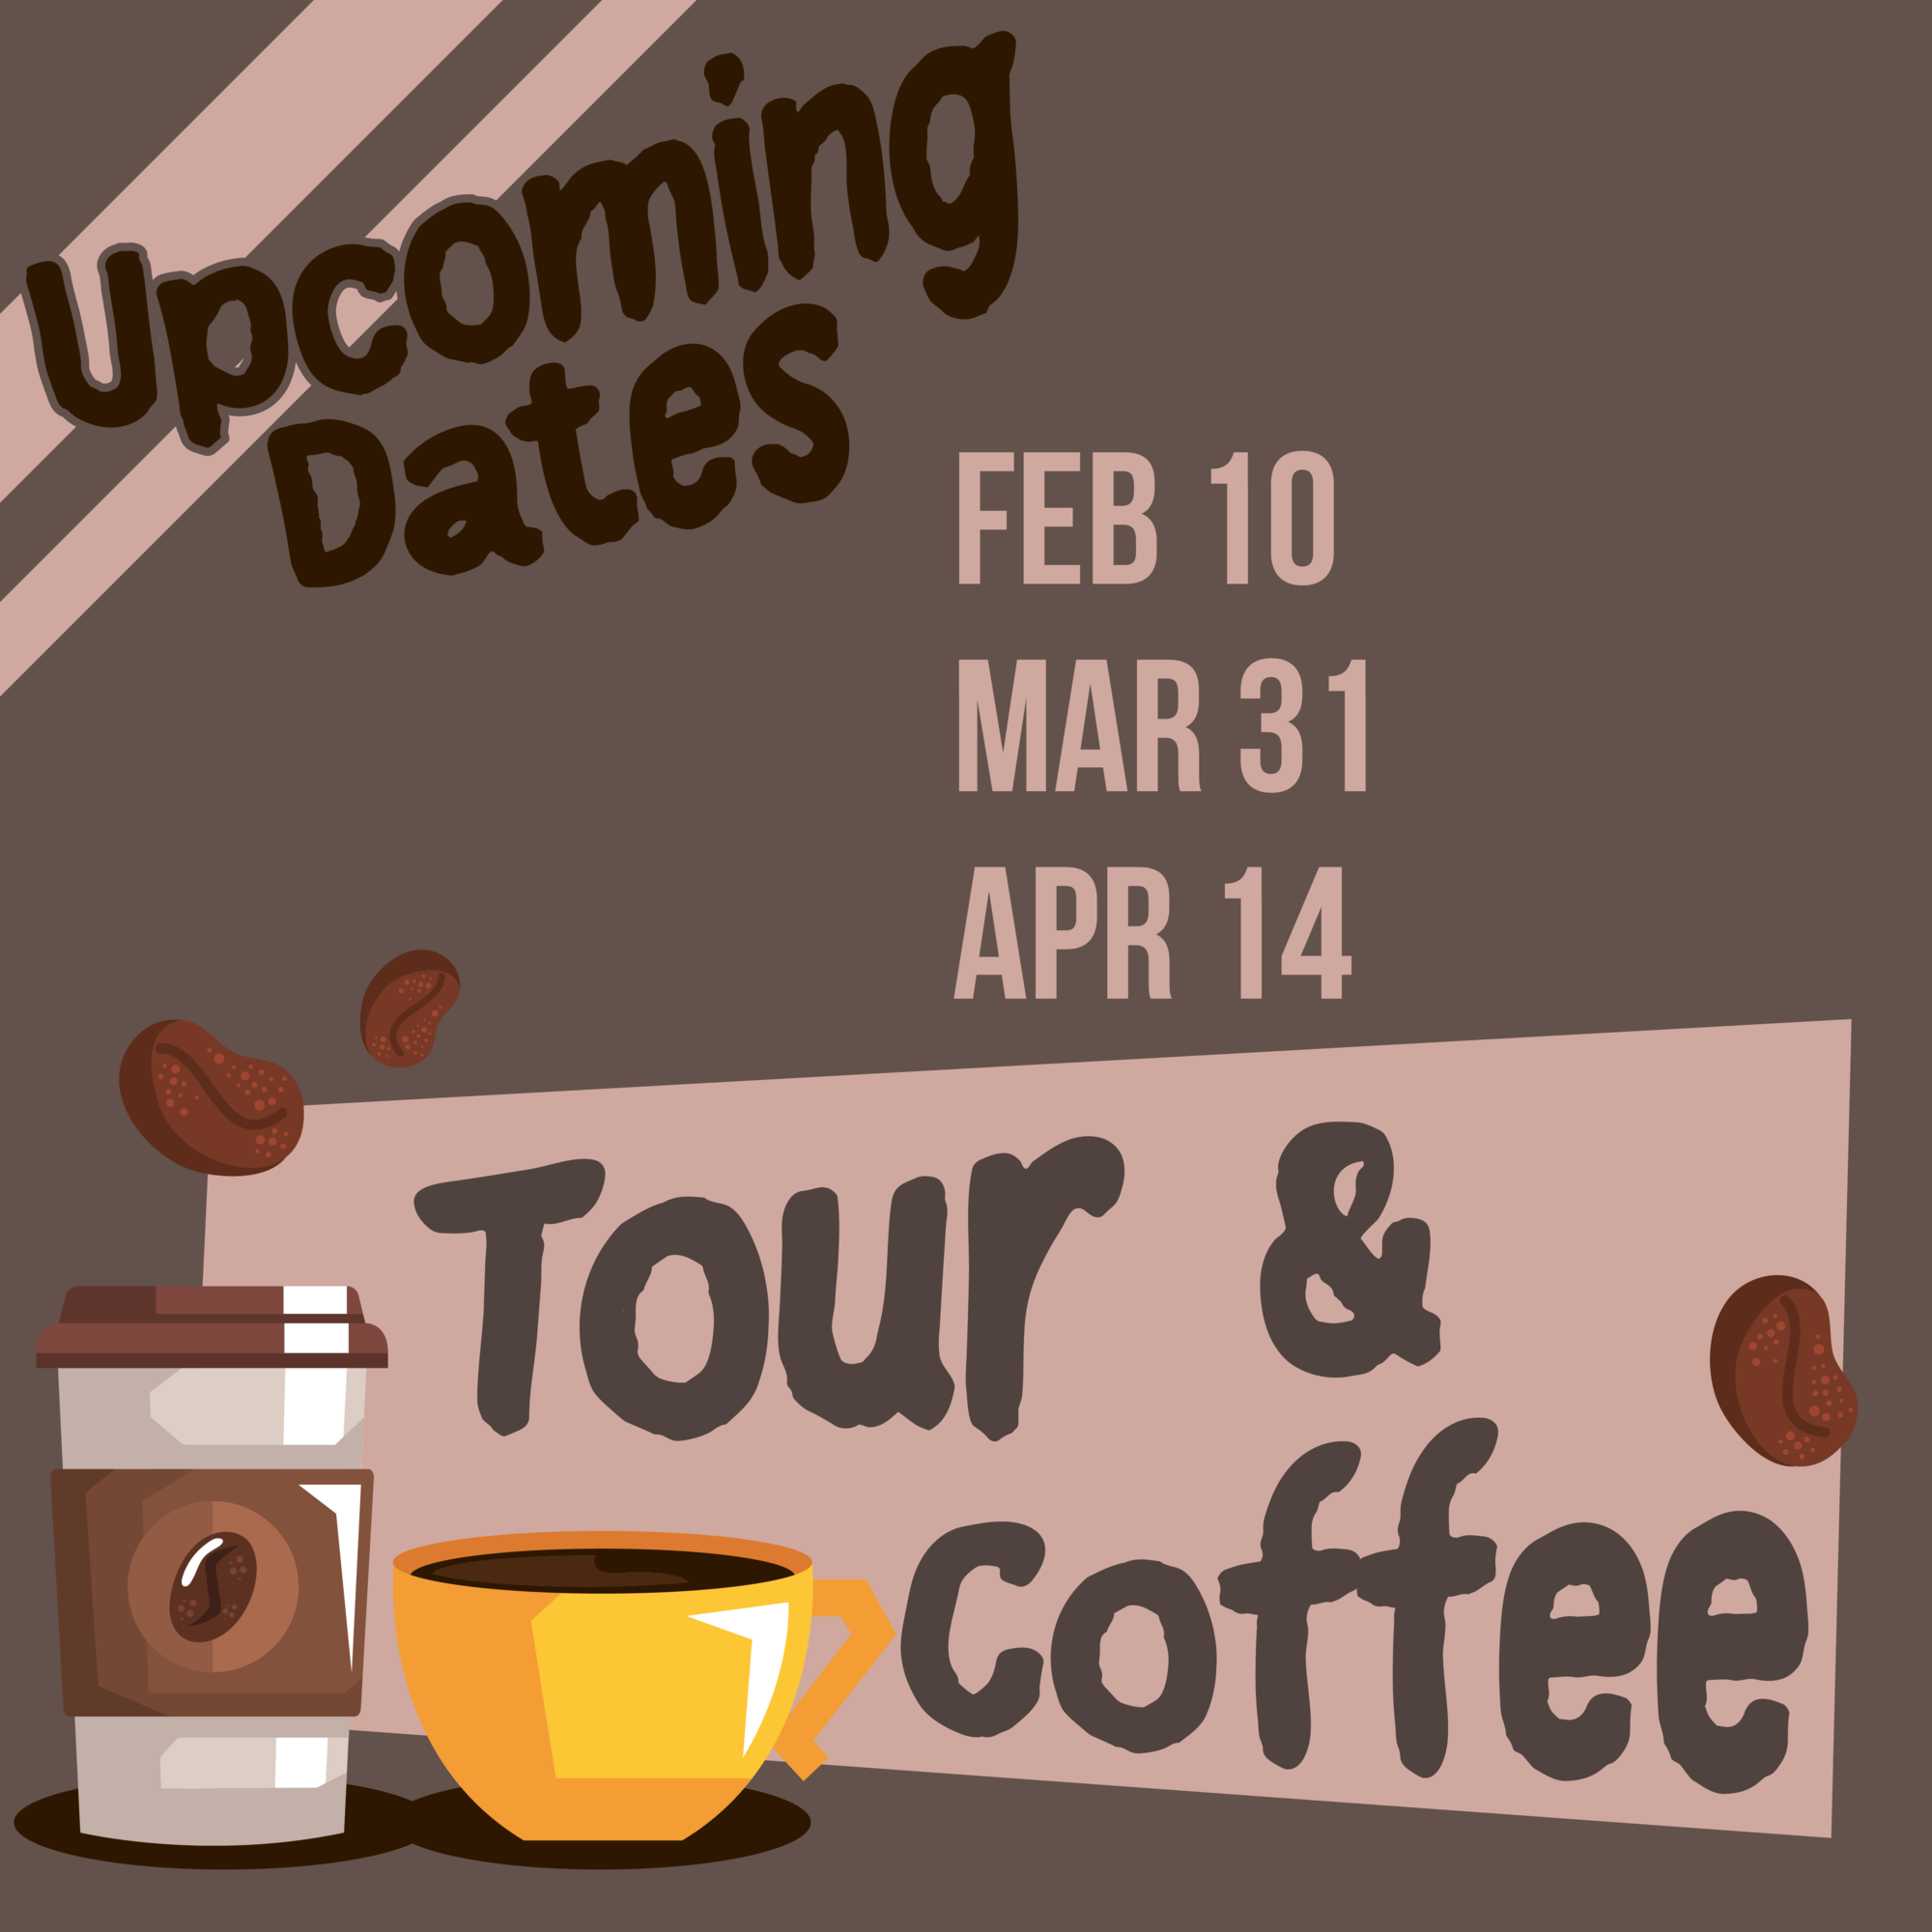 Event information for the Tour and Coffee dates